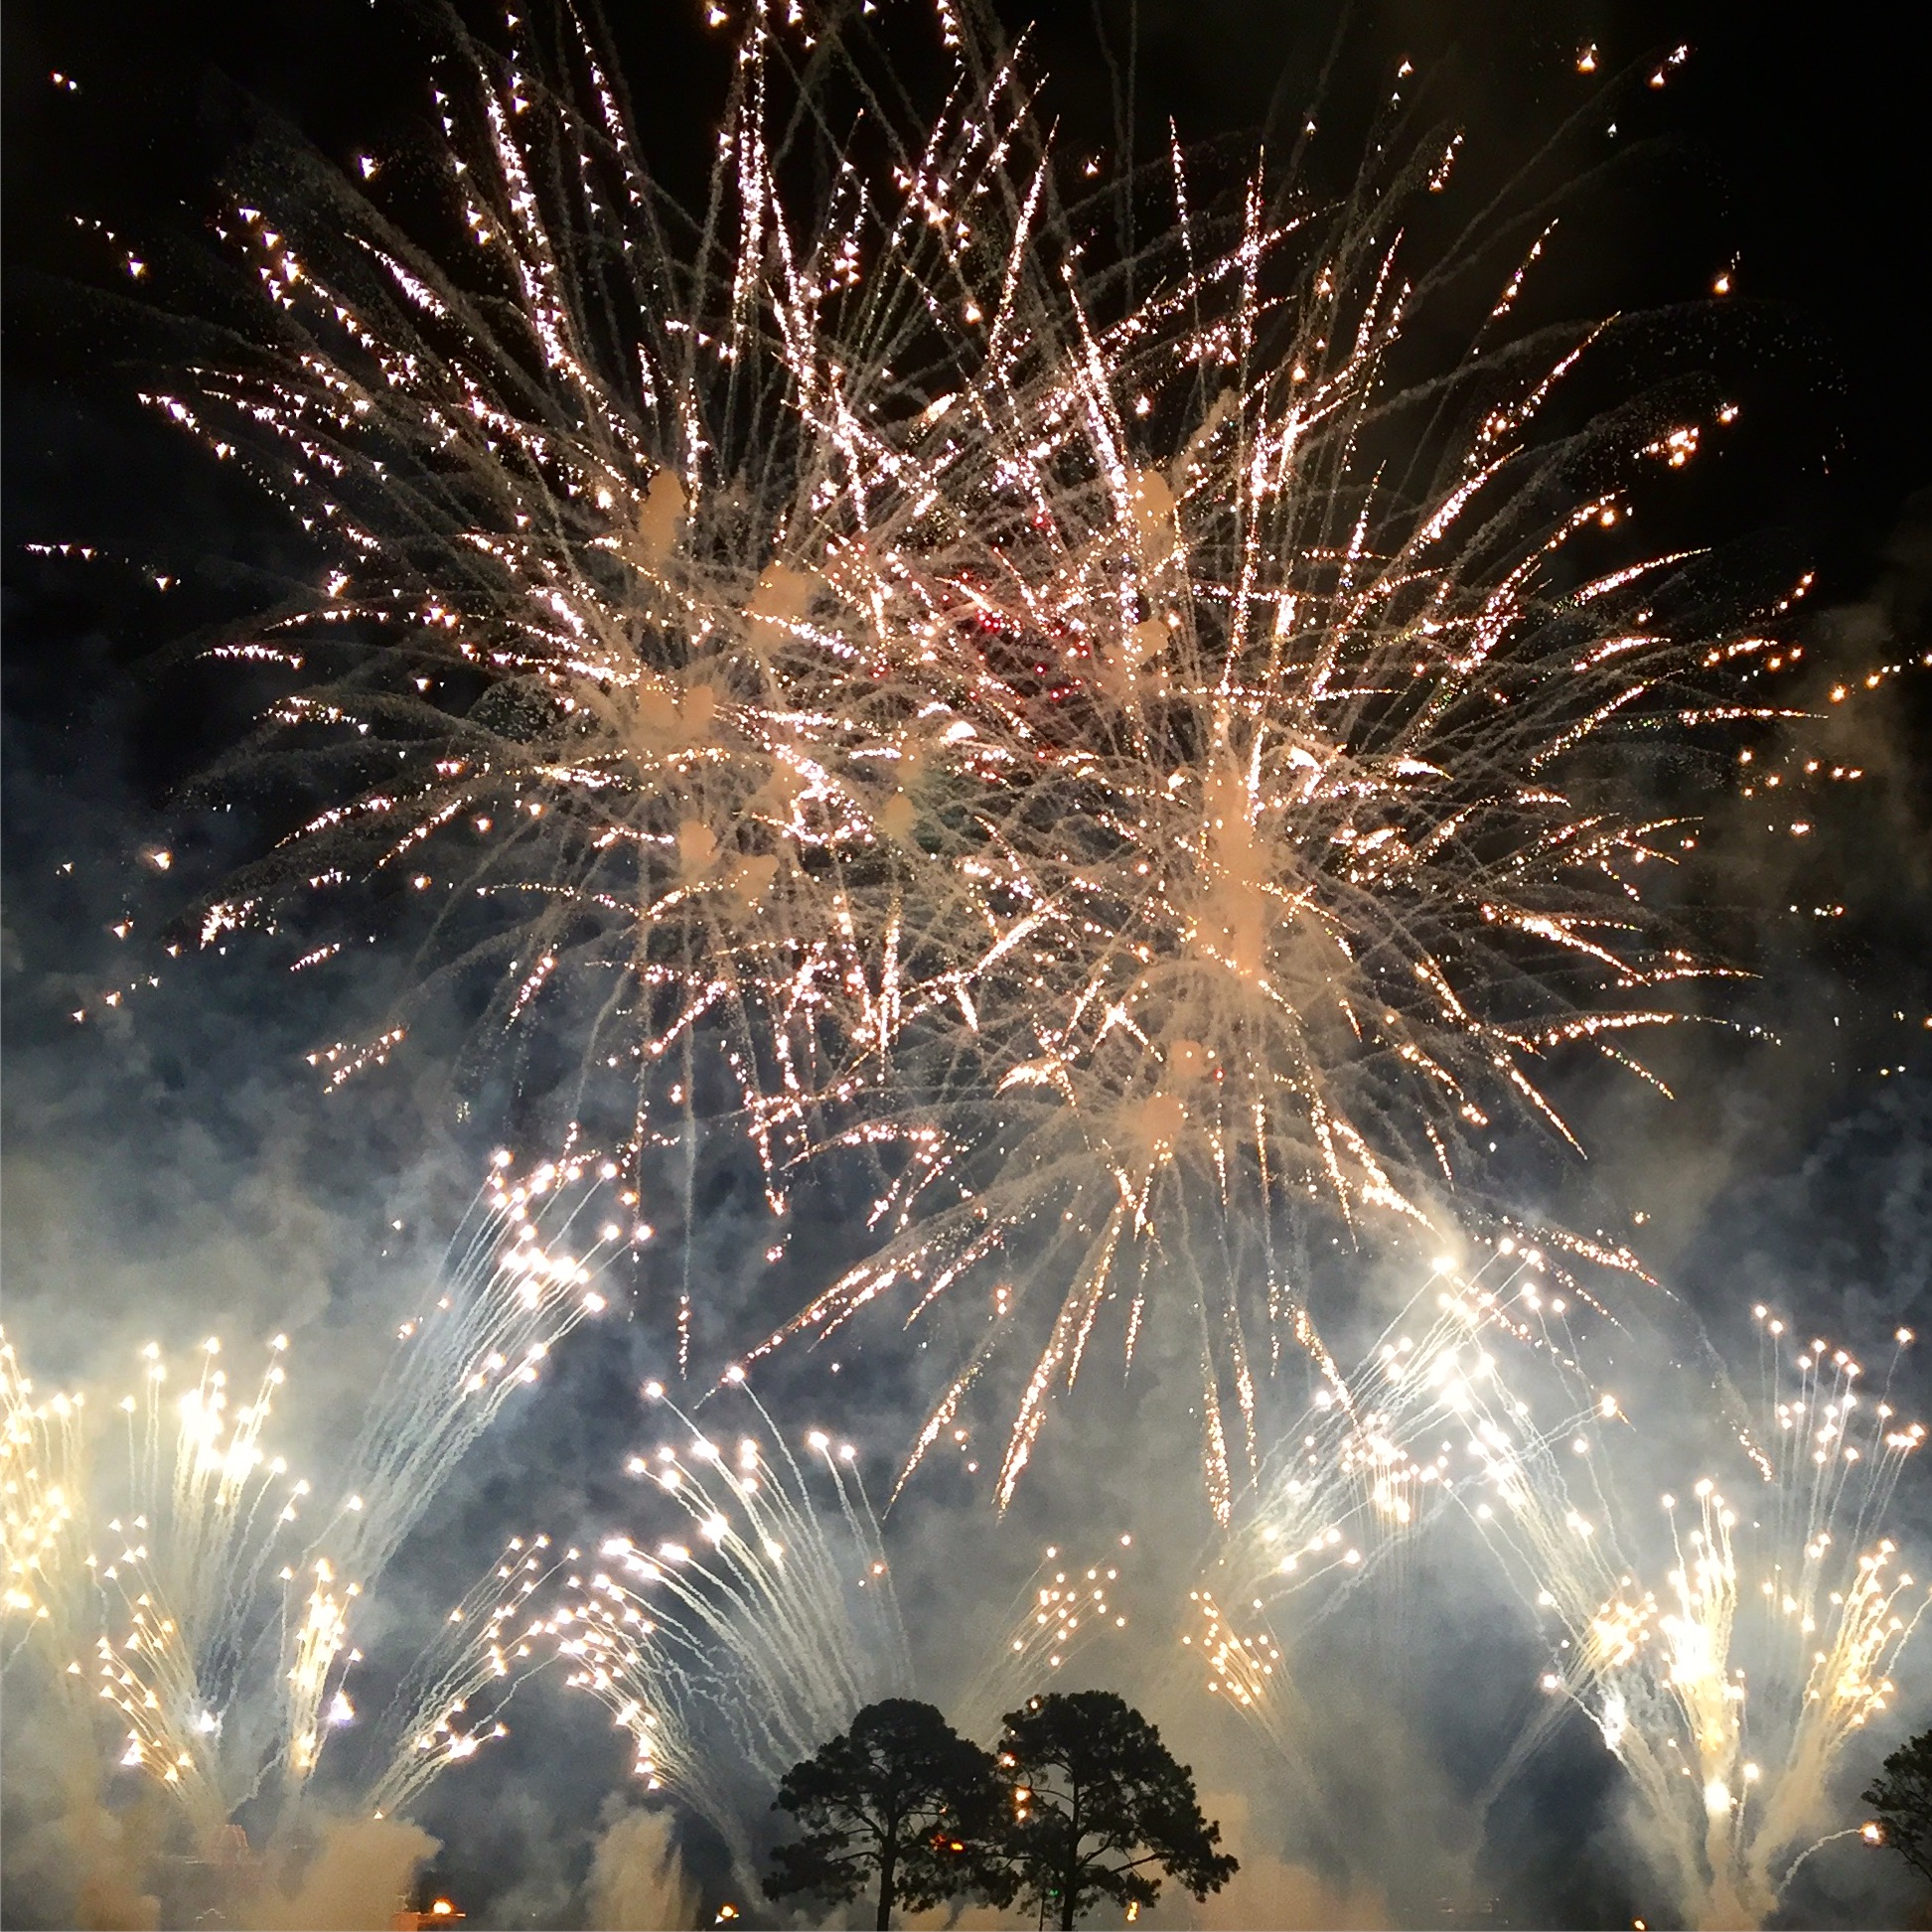 From One Of My Best Days At Walt Disney World Resort EVER! Amazing fireworks from Epcot #bestdayever #WDWresorts #waltdisneyworld #disneyparks #disneymom #mediaevent